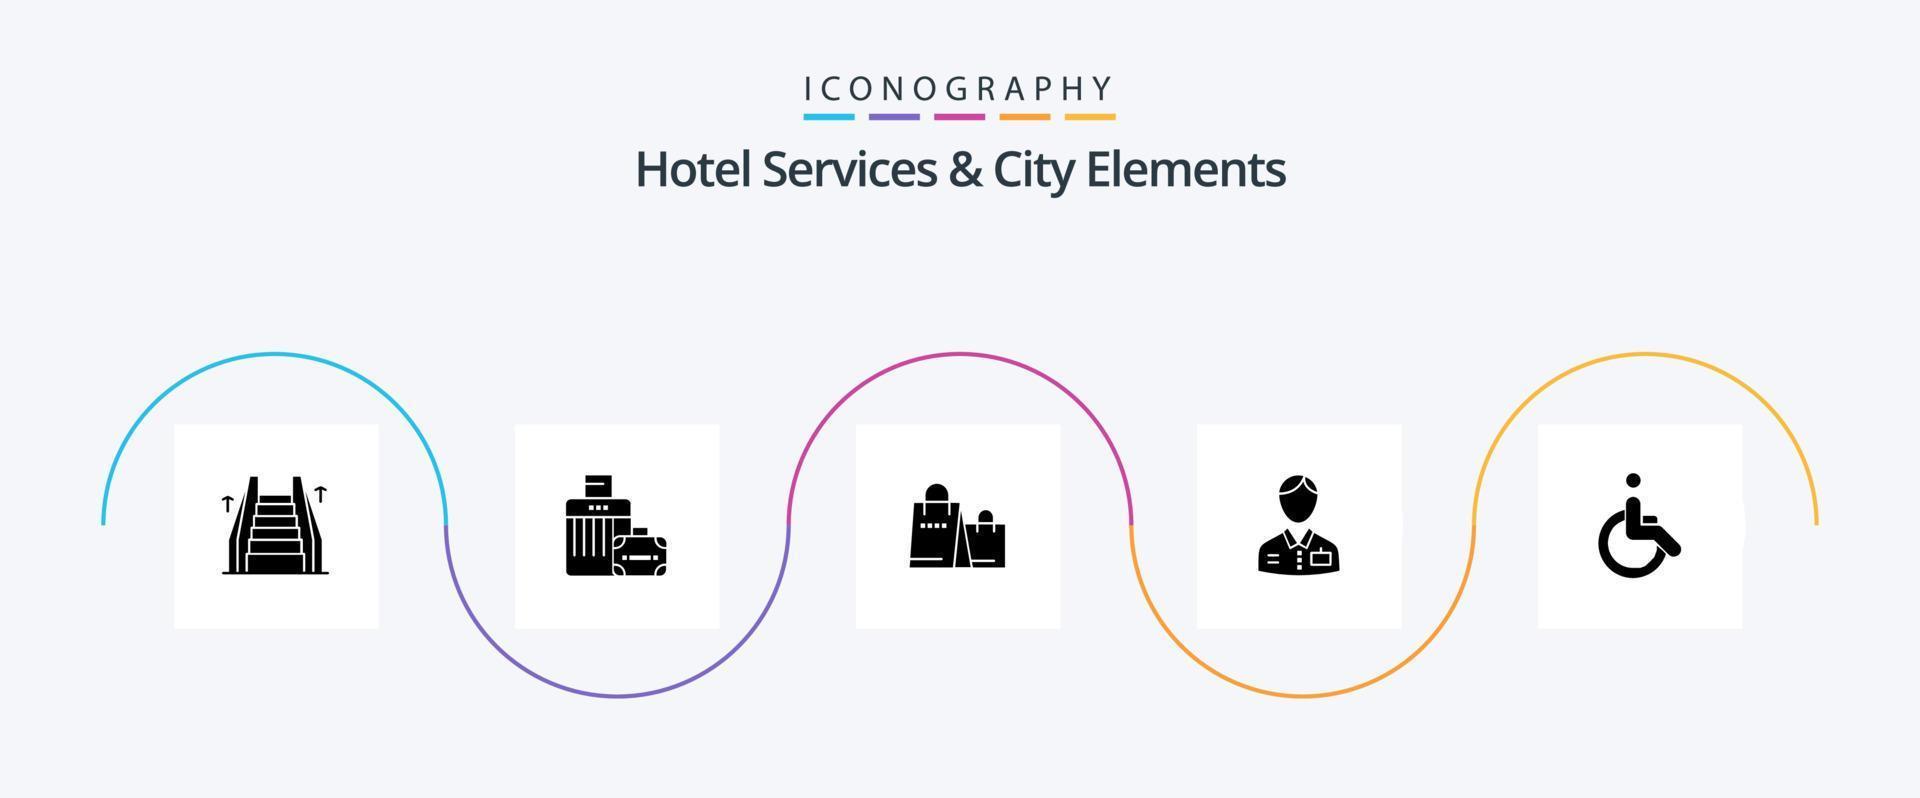 Hotel Services And City Elements Glyph 5 Icon Pack Including weelchair. hotel. bag . doorman. bellboy vector